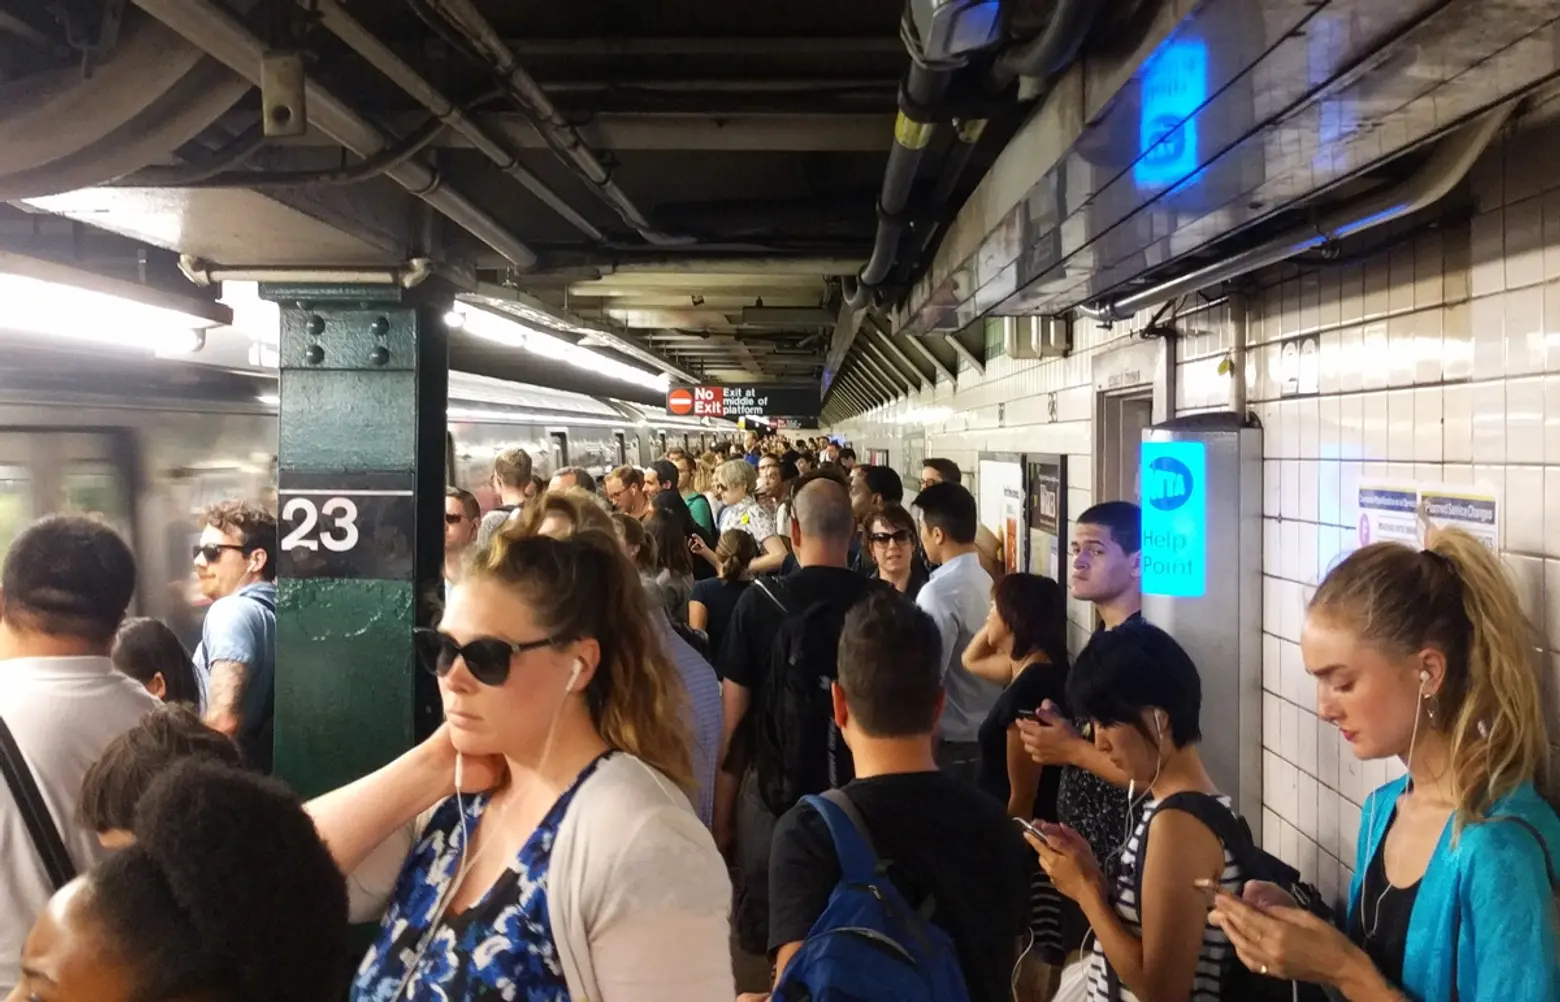 MTA announces $800M emergency rescue plan for a distressed subway system, includes removing seats